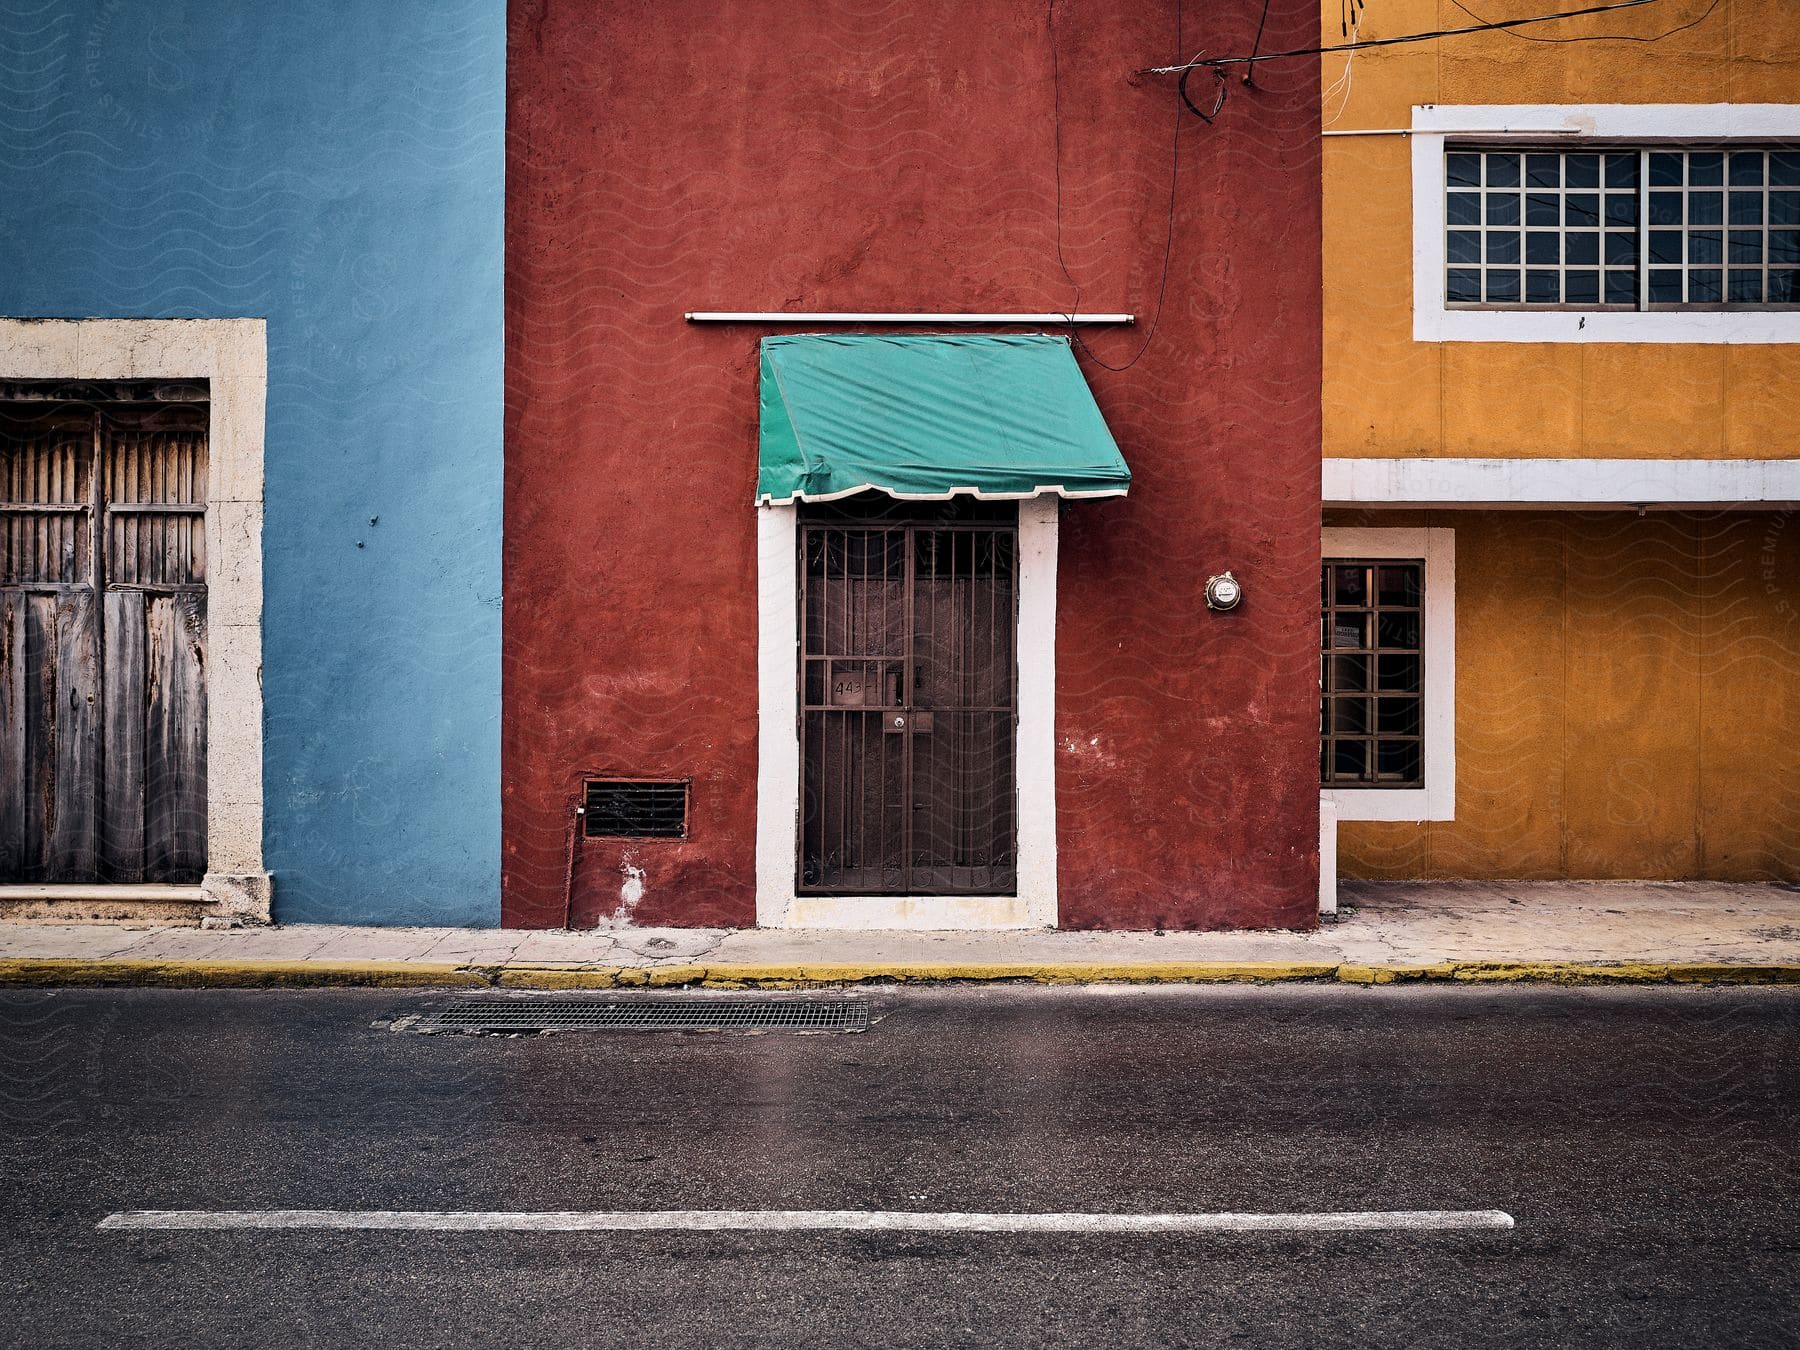 buildings along a city block are painted in bold colors